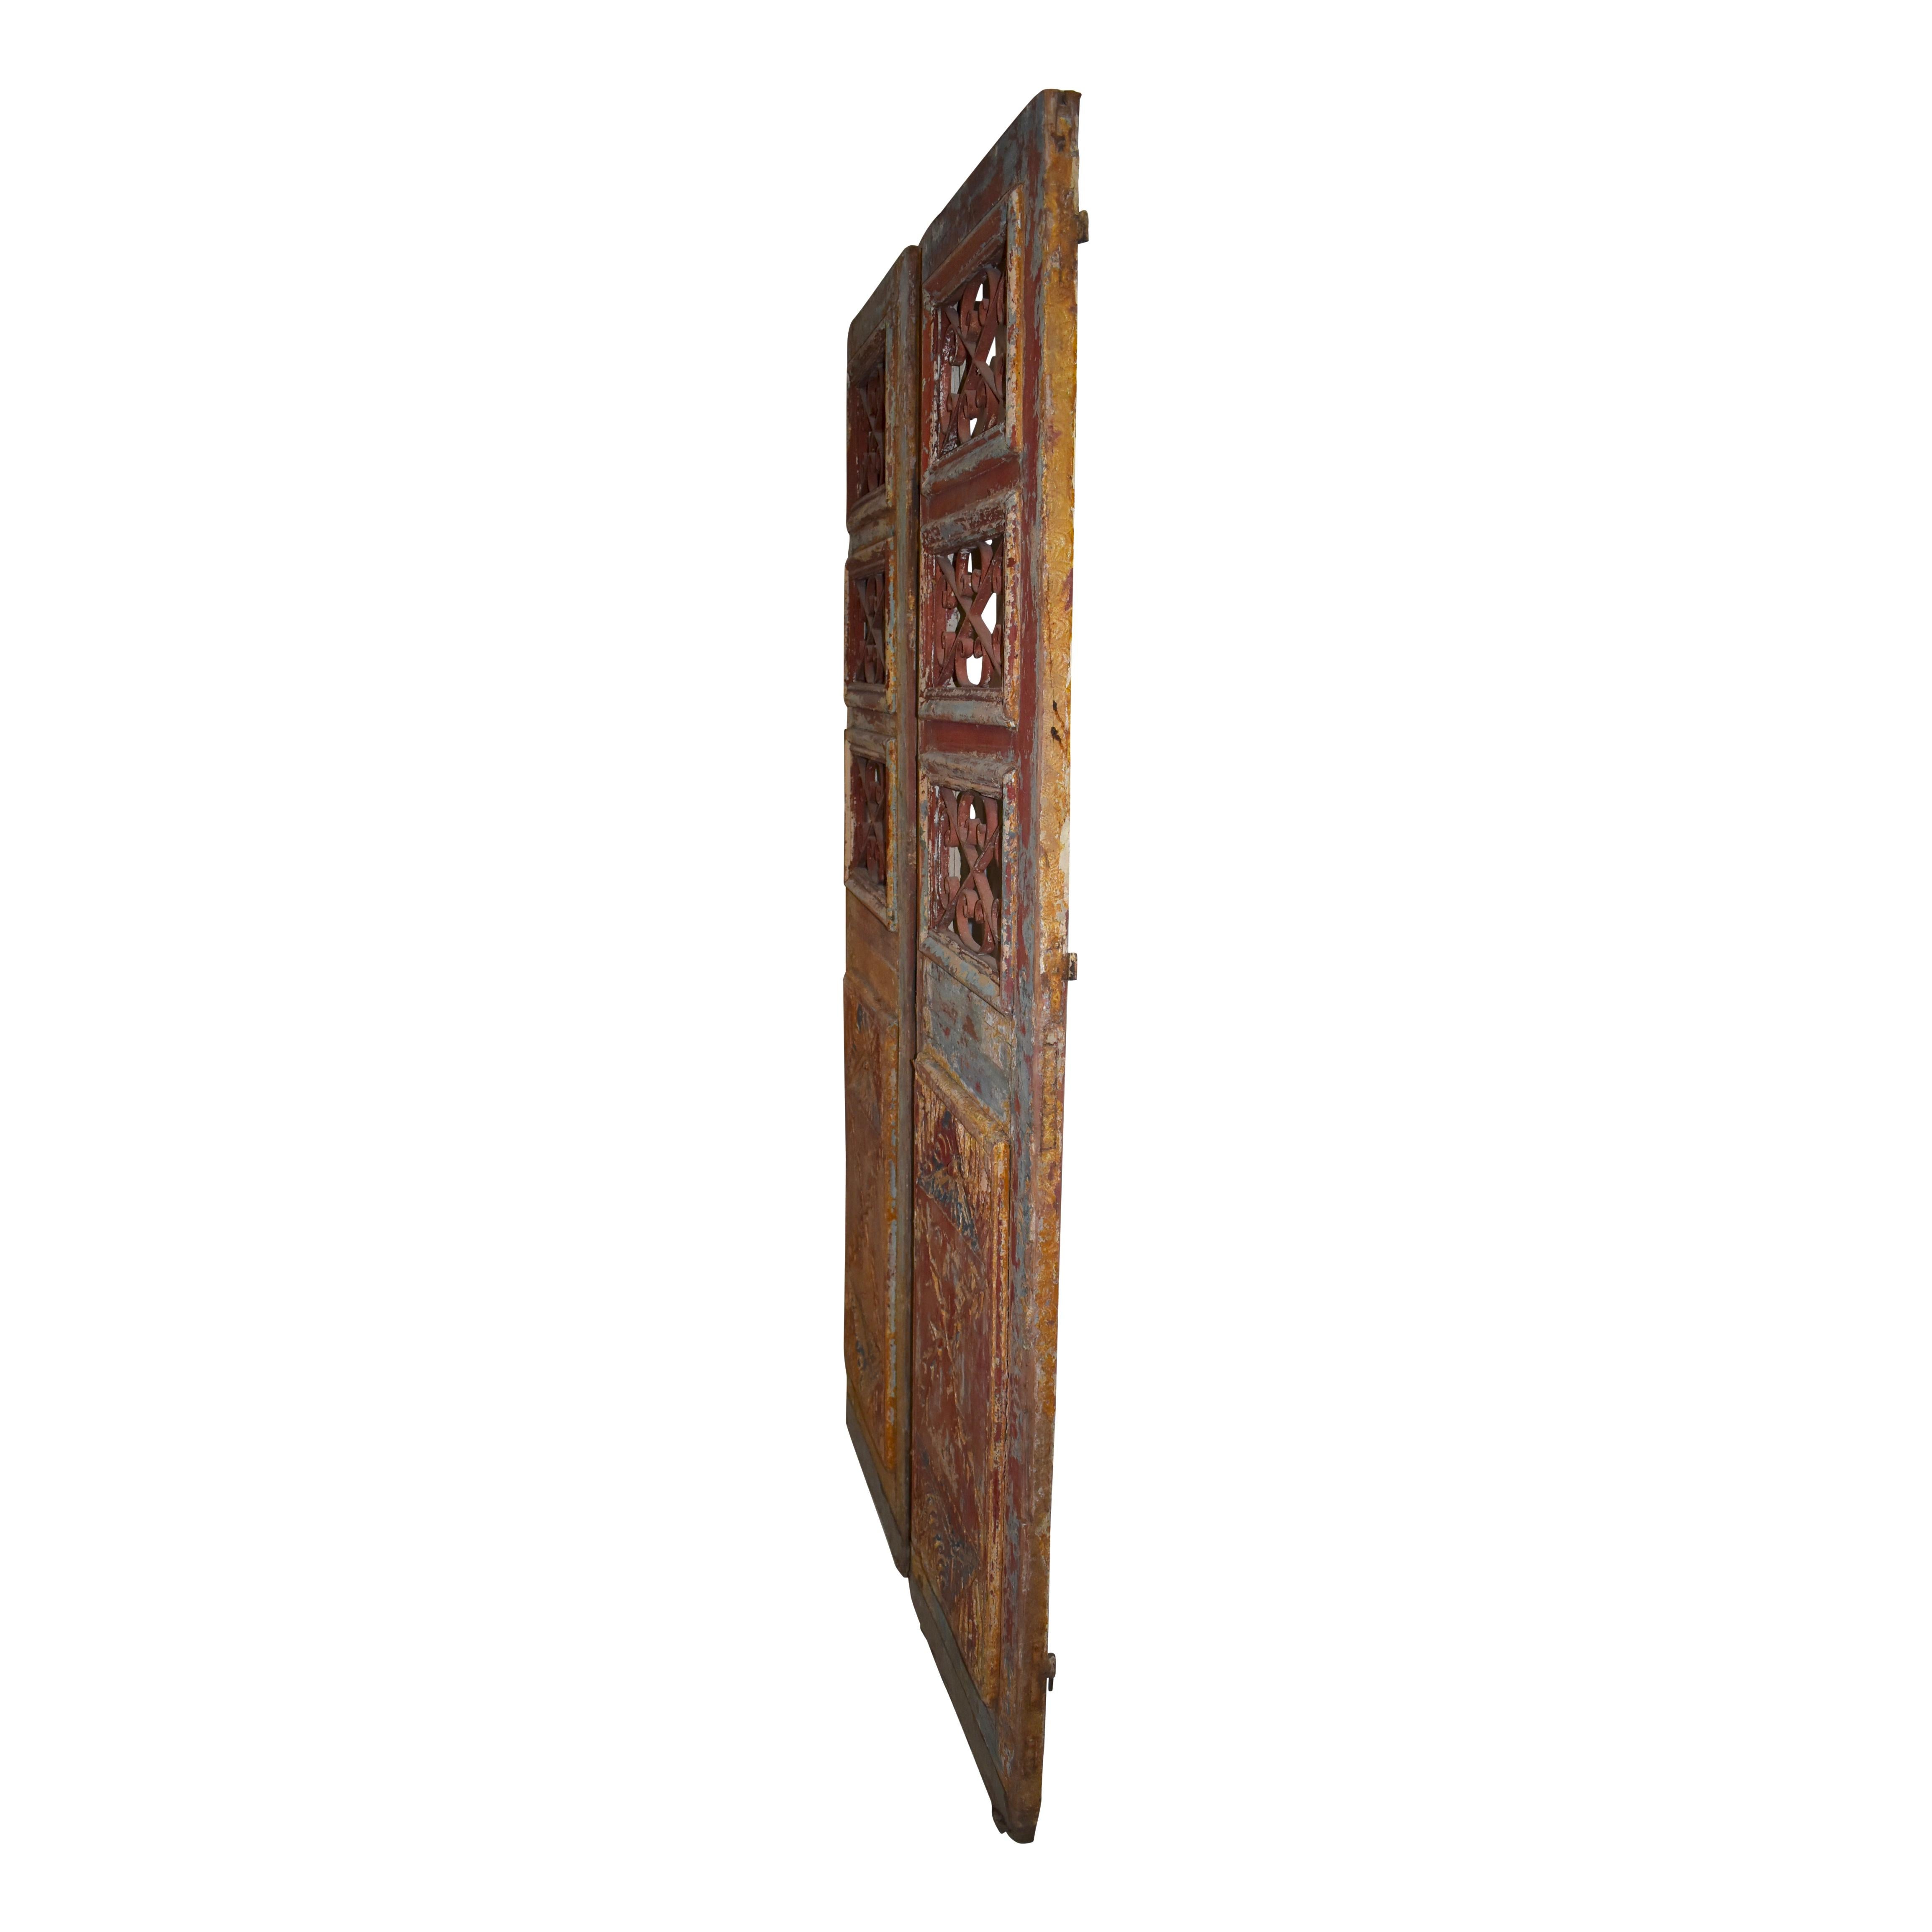 This set of Egyptian doors from the turn of the century is made of Eastern European pine. Each door has a carved panel on the lower half and three window frames inset with decorative metal on the upper half. One of doors has a portion of vintage